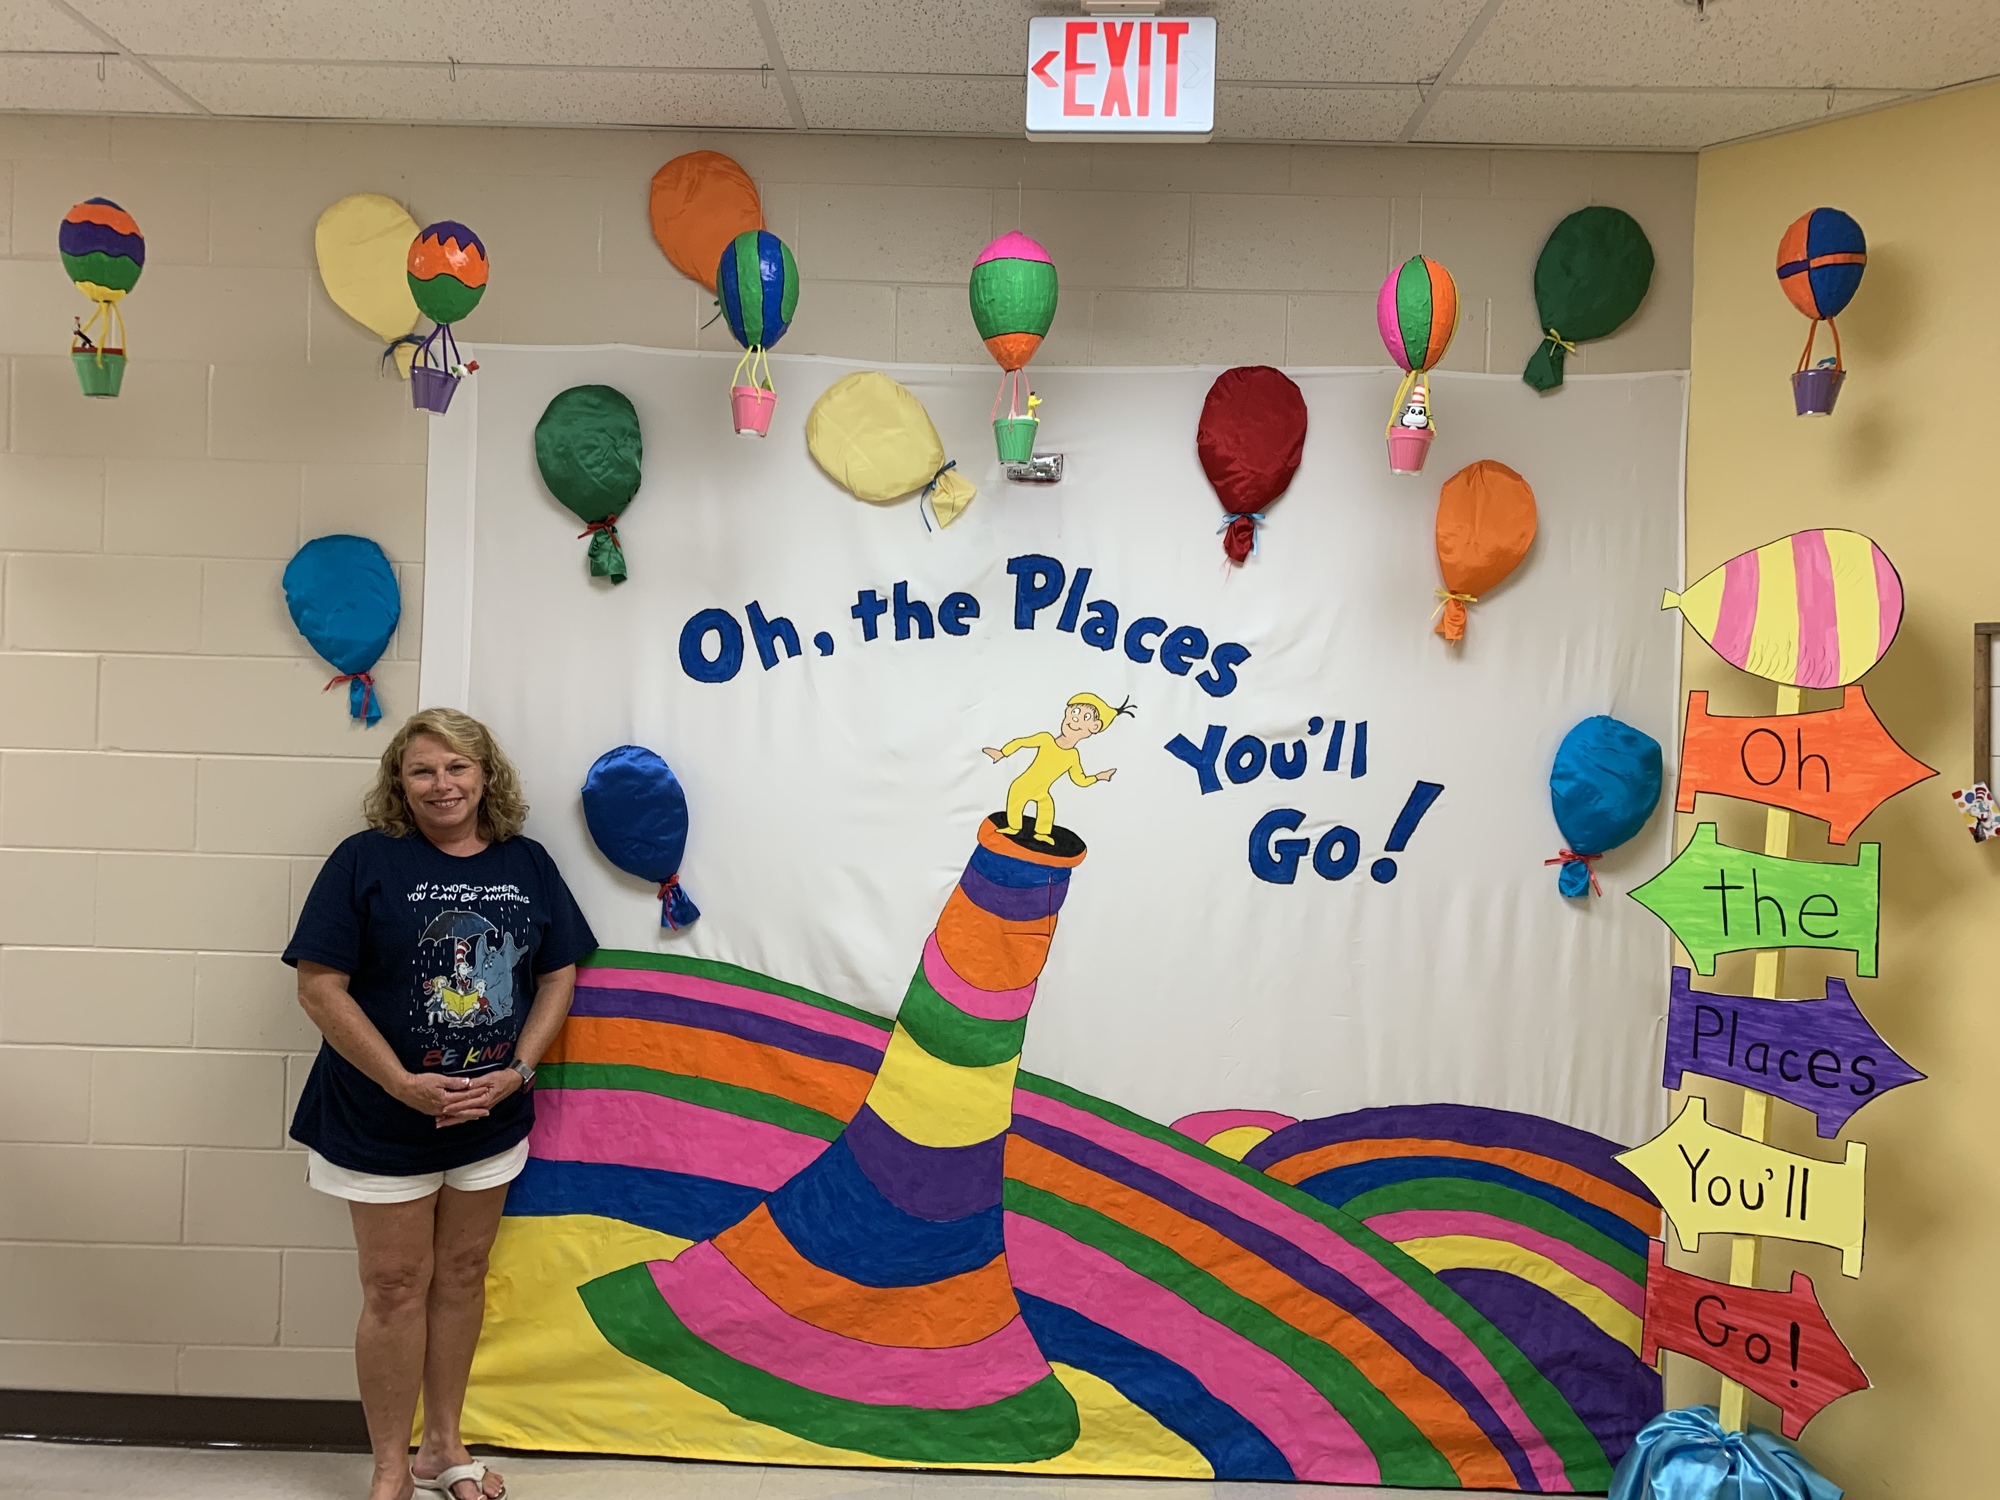 Peggy Turner, a kindergarten teacher at Robert E. Willis Elementary School, invites her students to see the places they'll go with her Dr. Seuss themed classroom decorations. Courtesy photo.